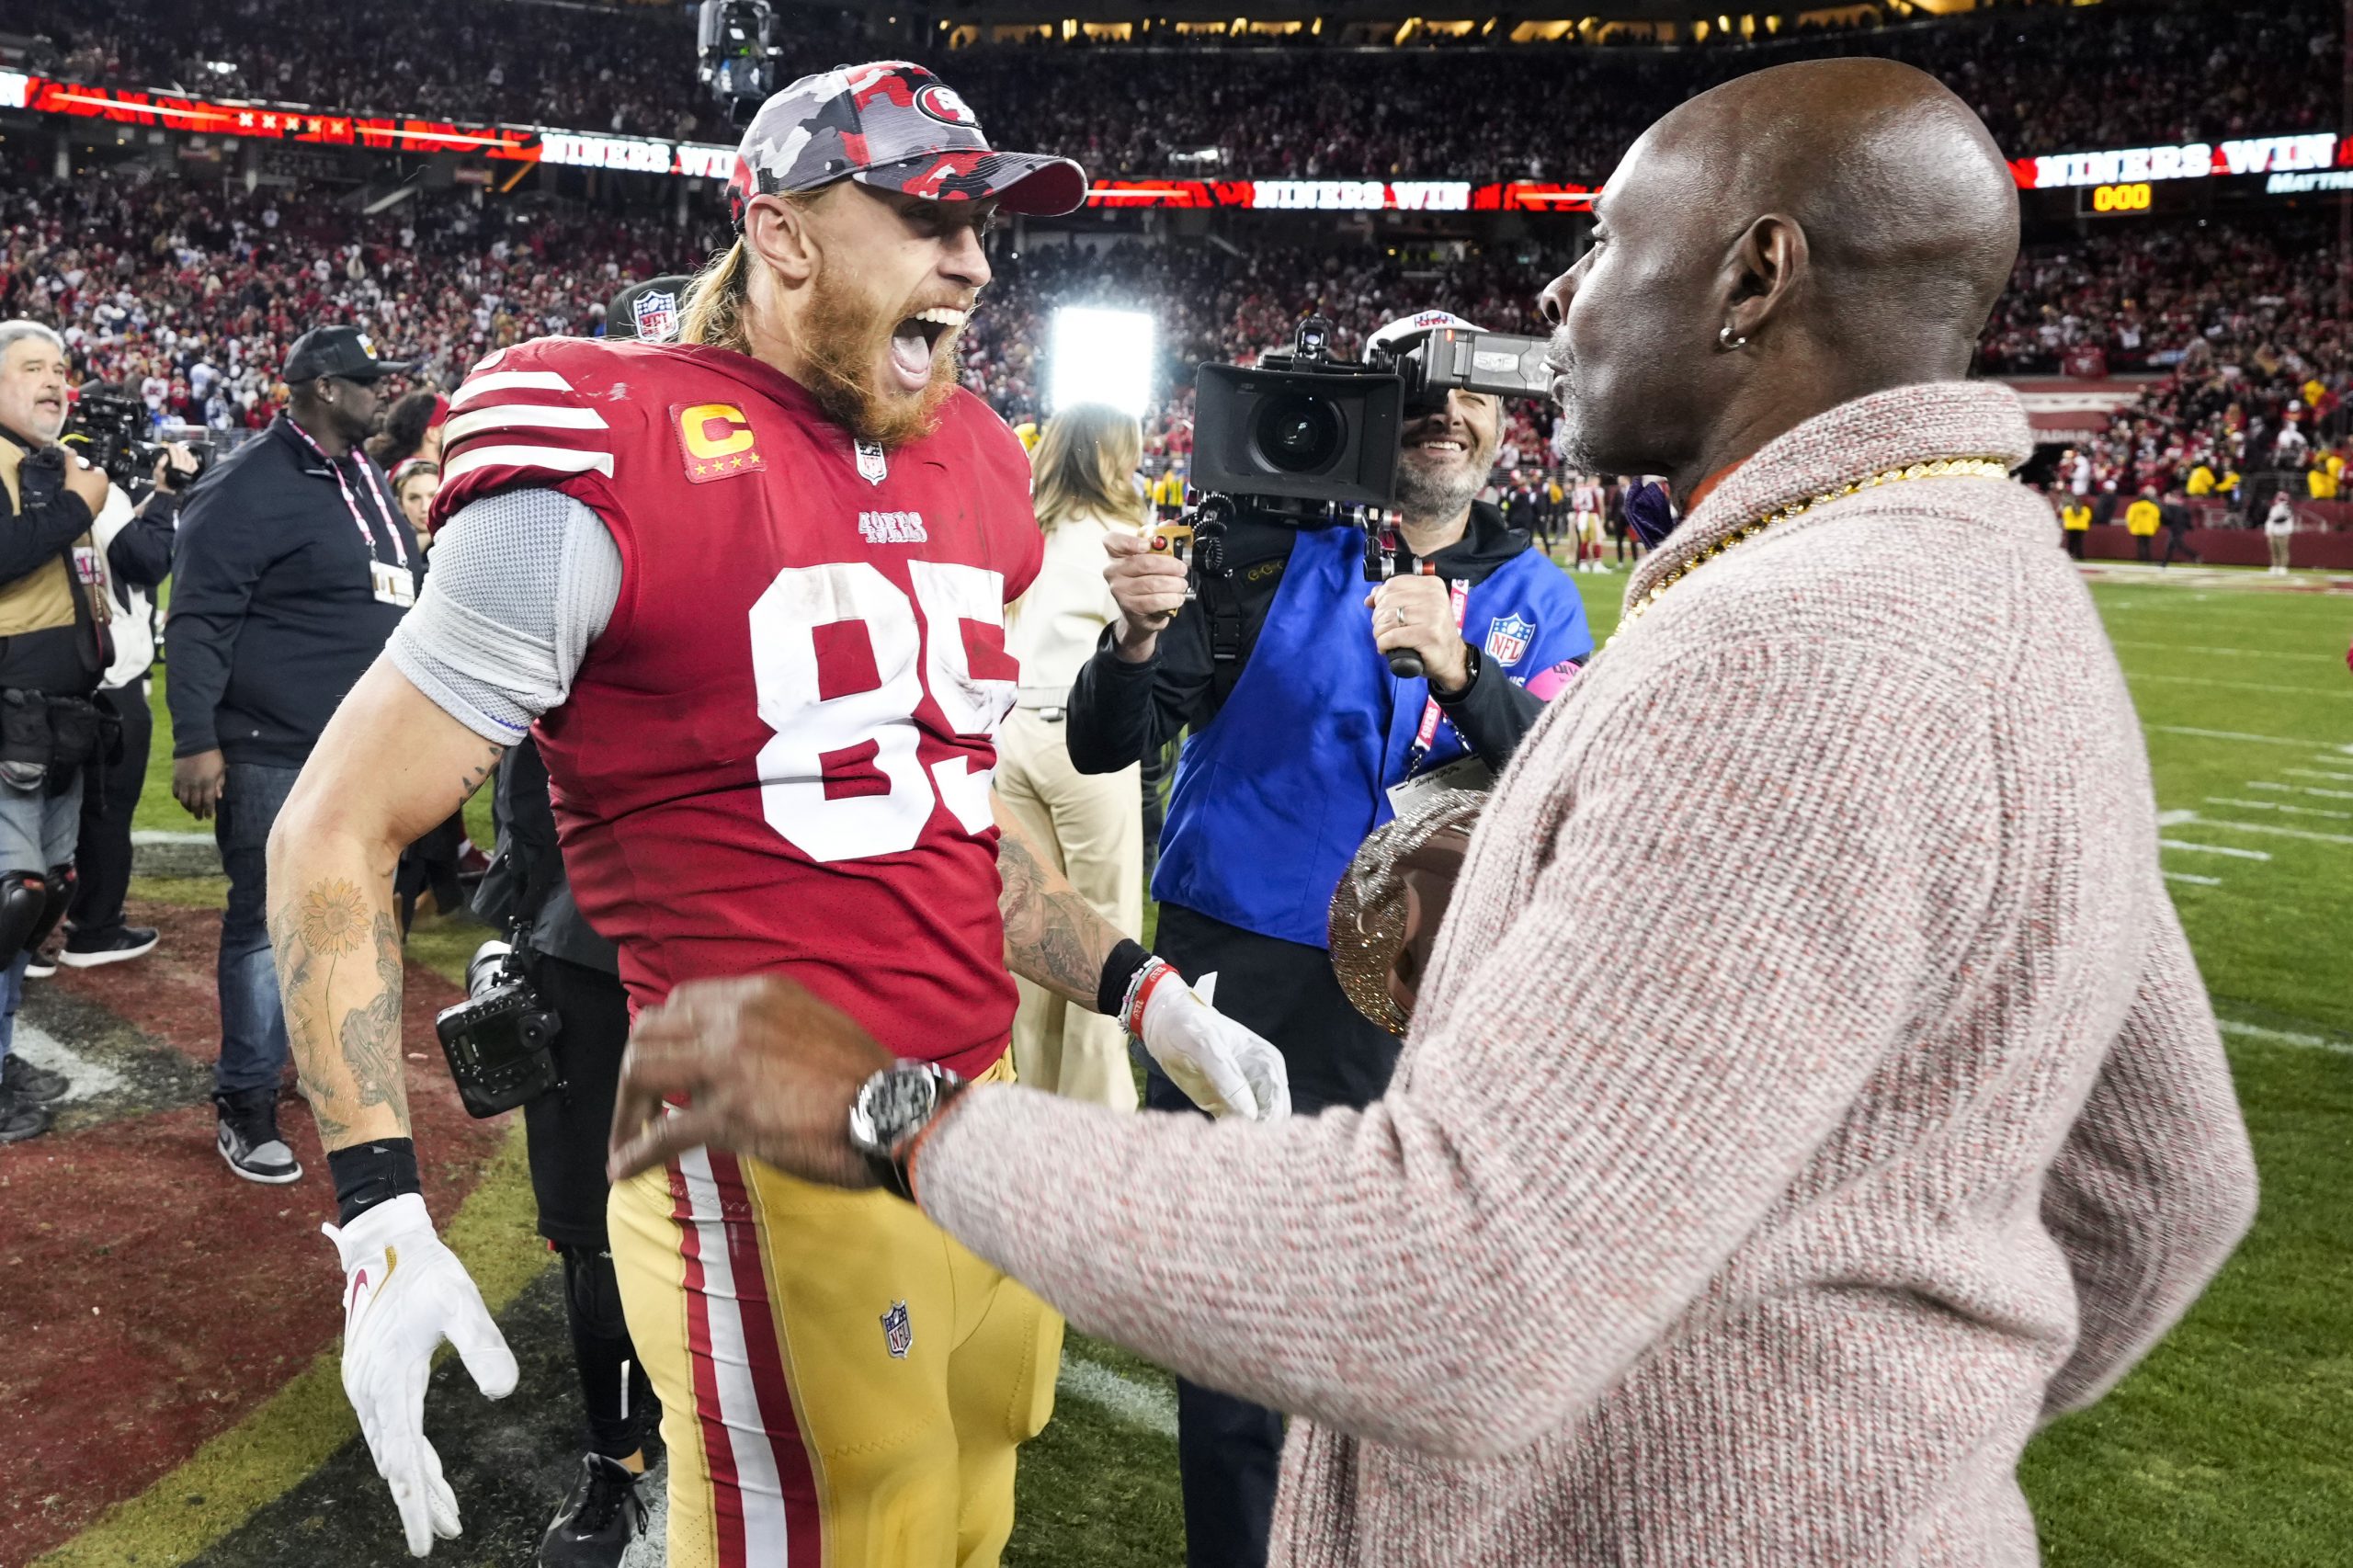 George Kittle #85 of the San Francisco 49ers celebrates with NFL Hall of Famer Jerry Rice after def...